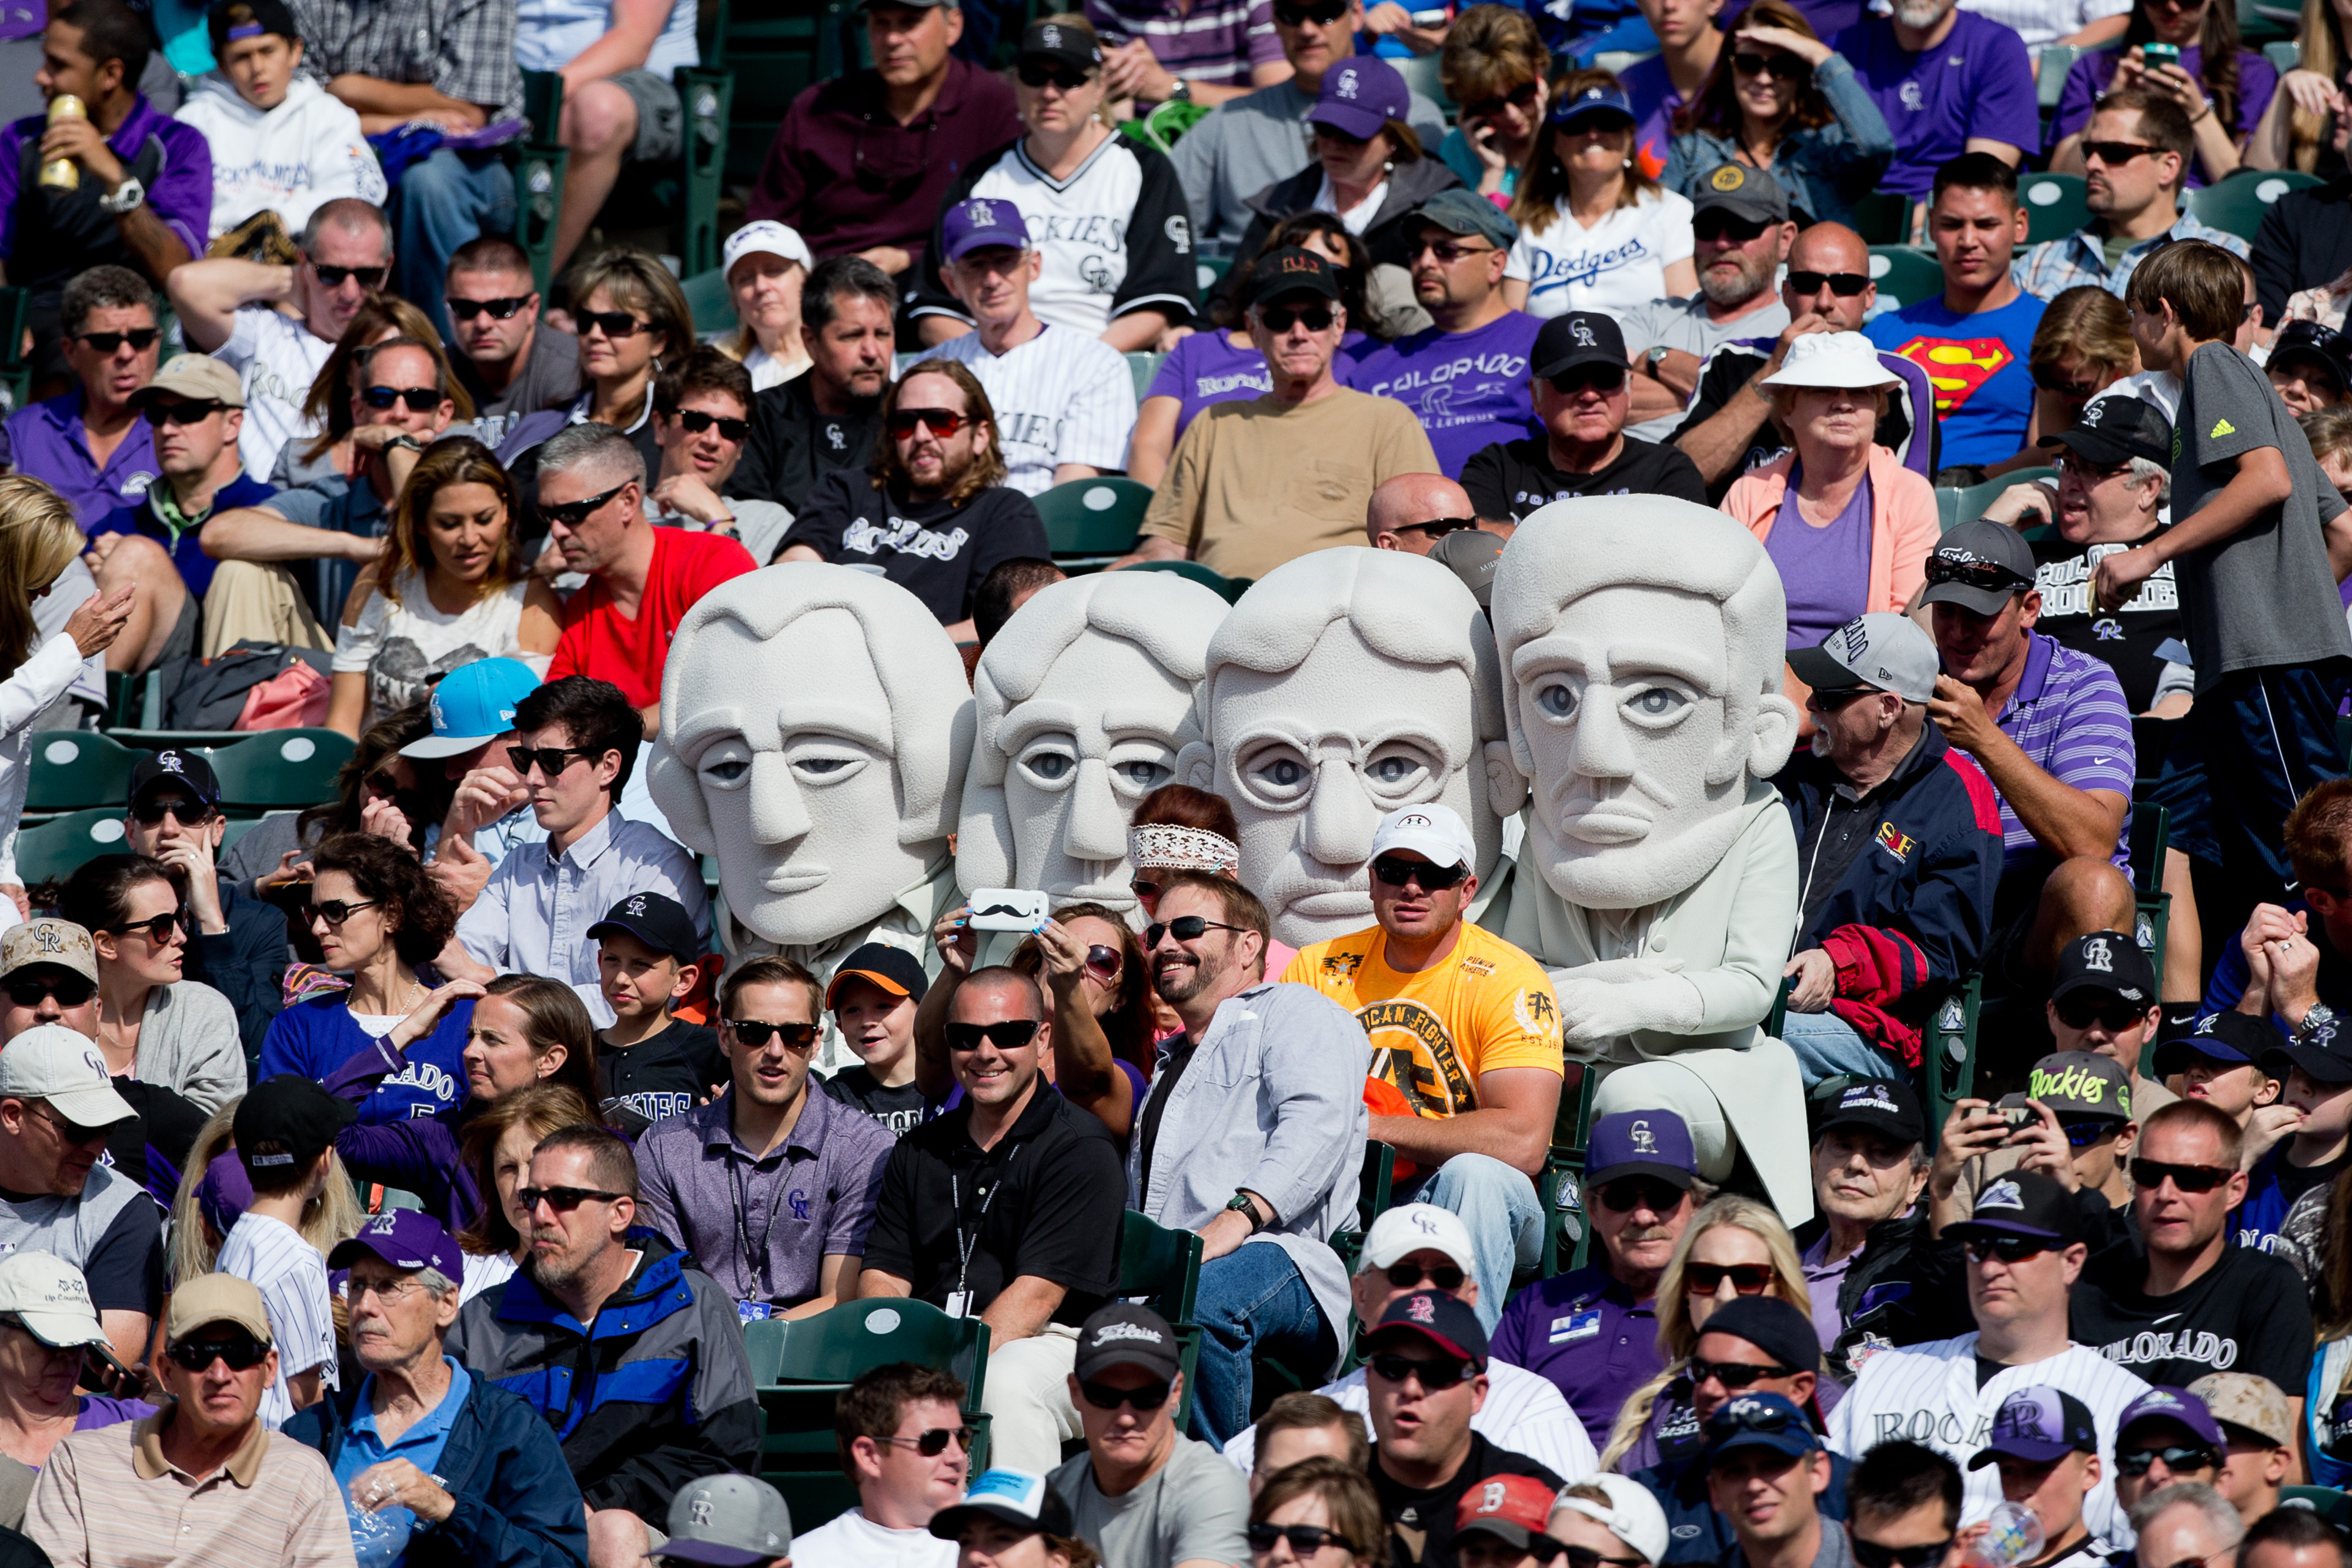 The Presidents are also Rockies fans, apparently.